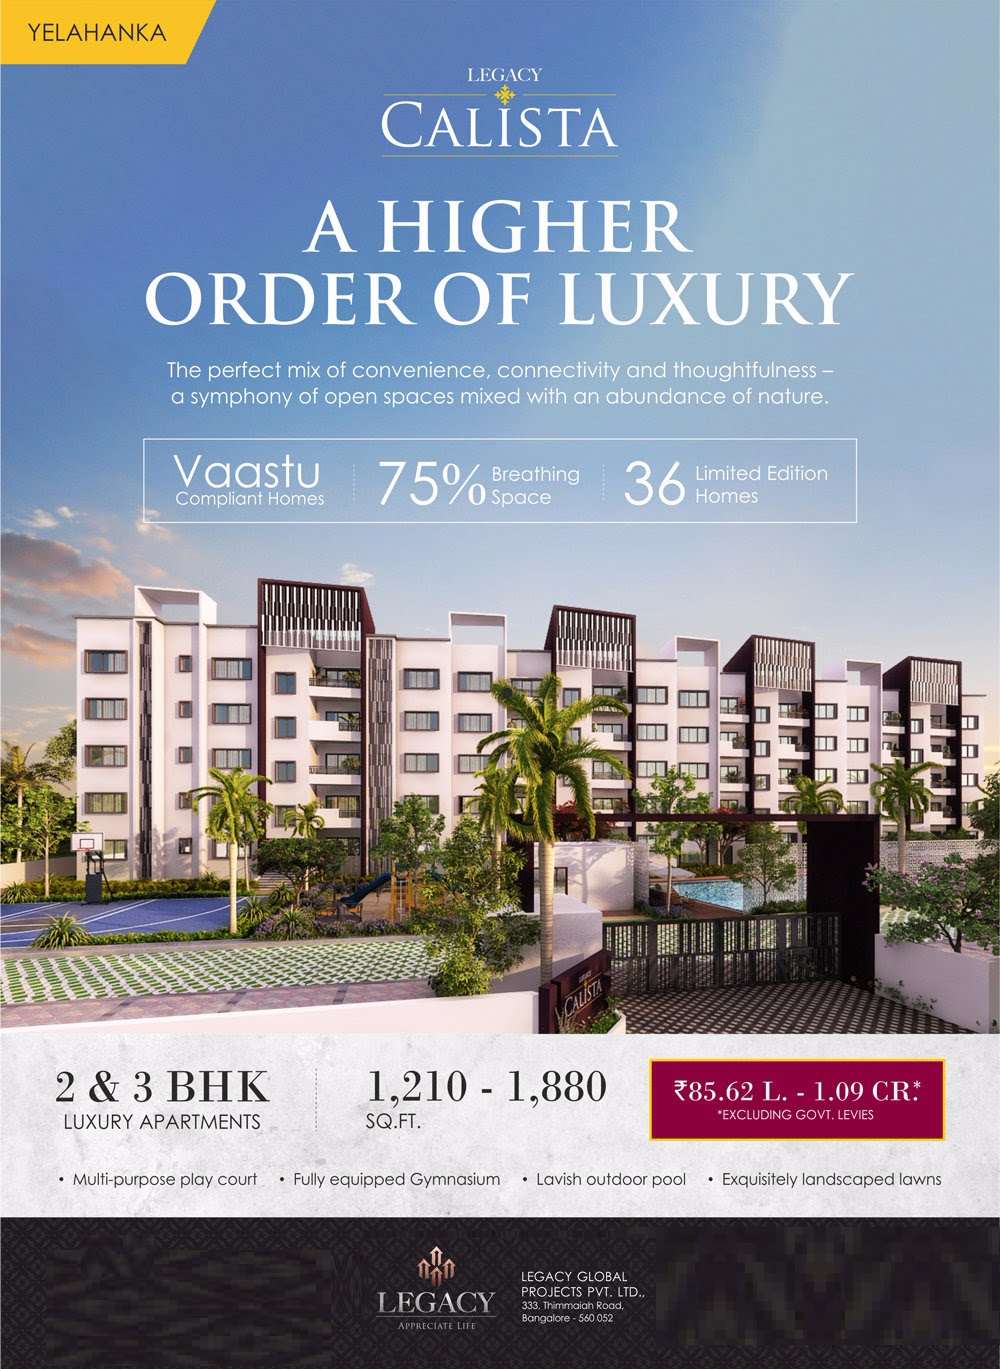 Live in a higher order of luxury at Legacy Calista in Bangalore